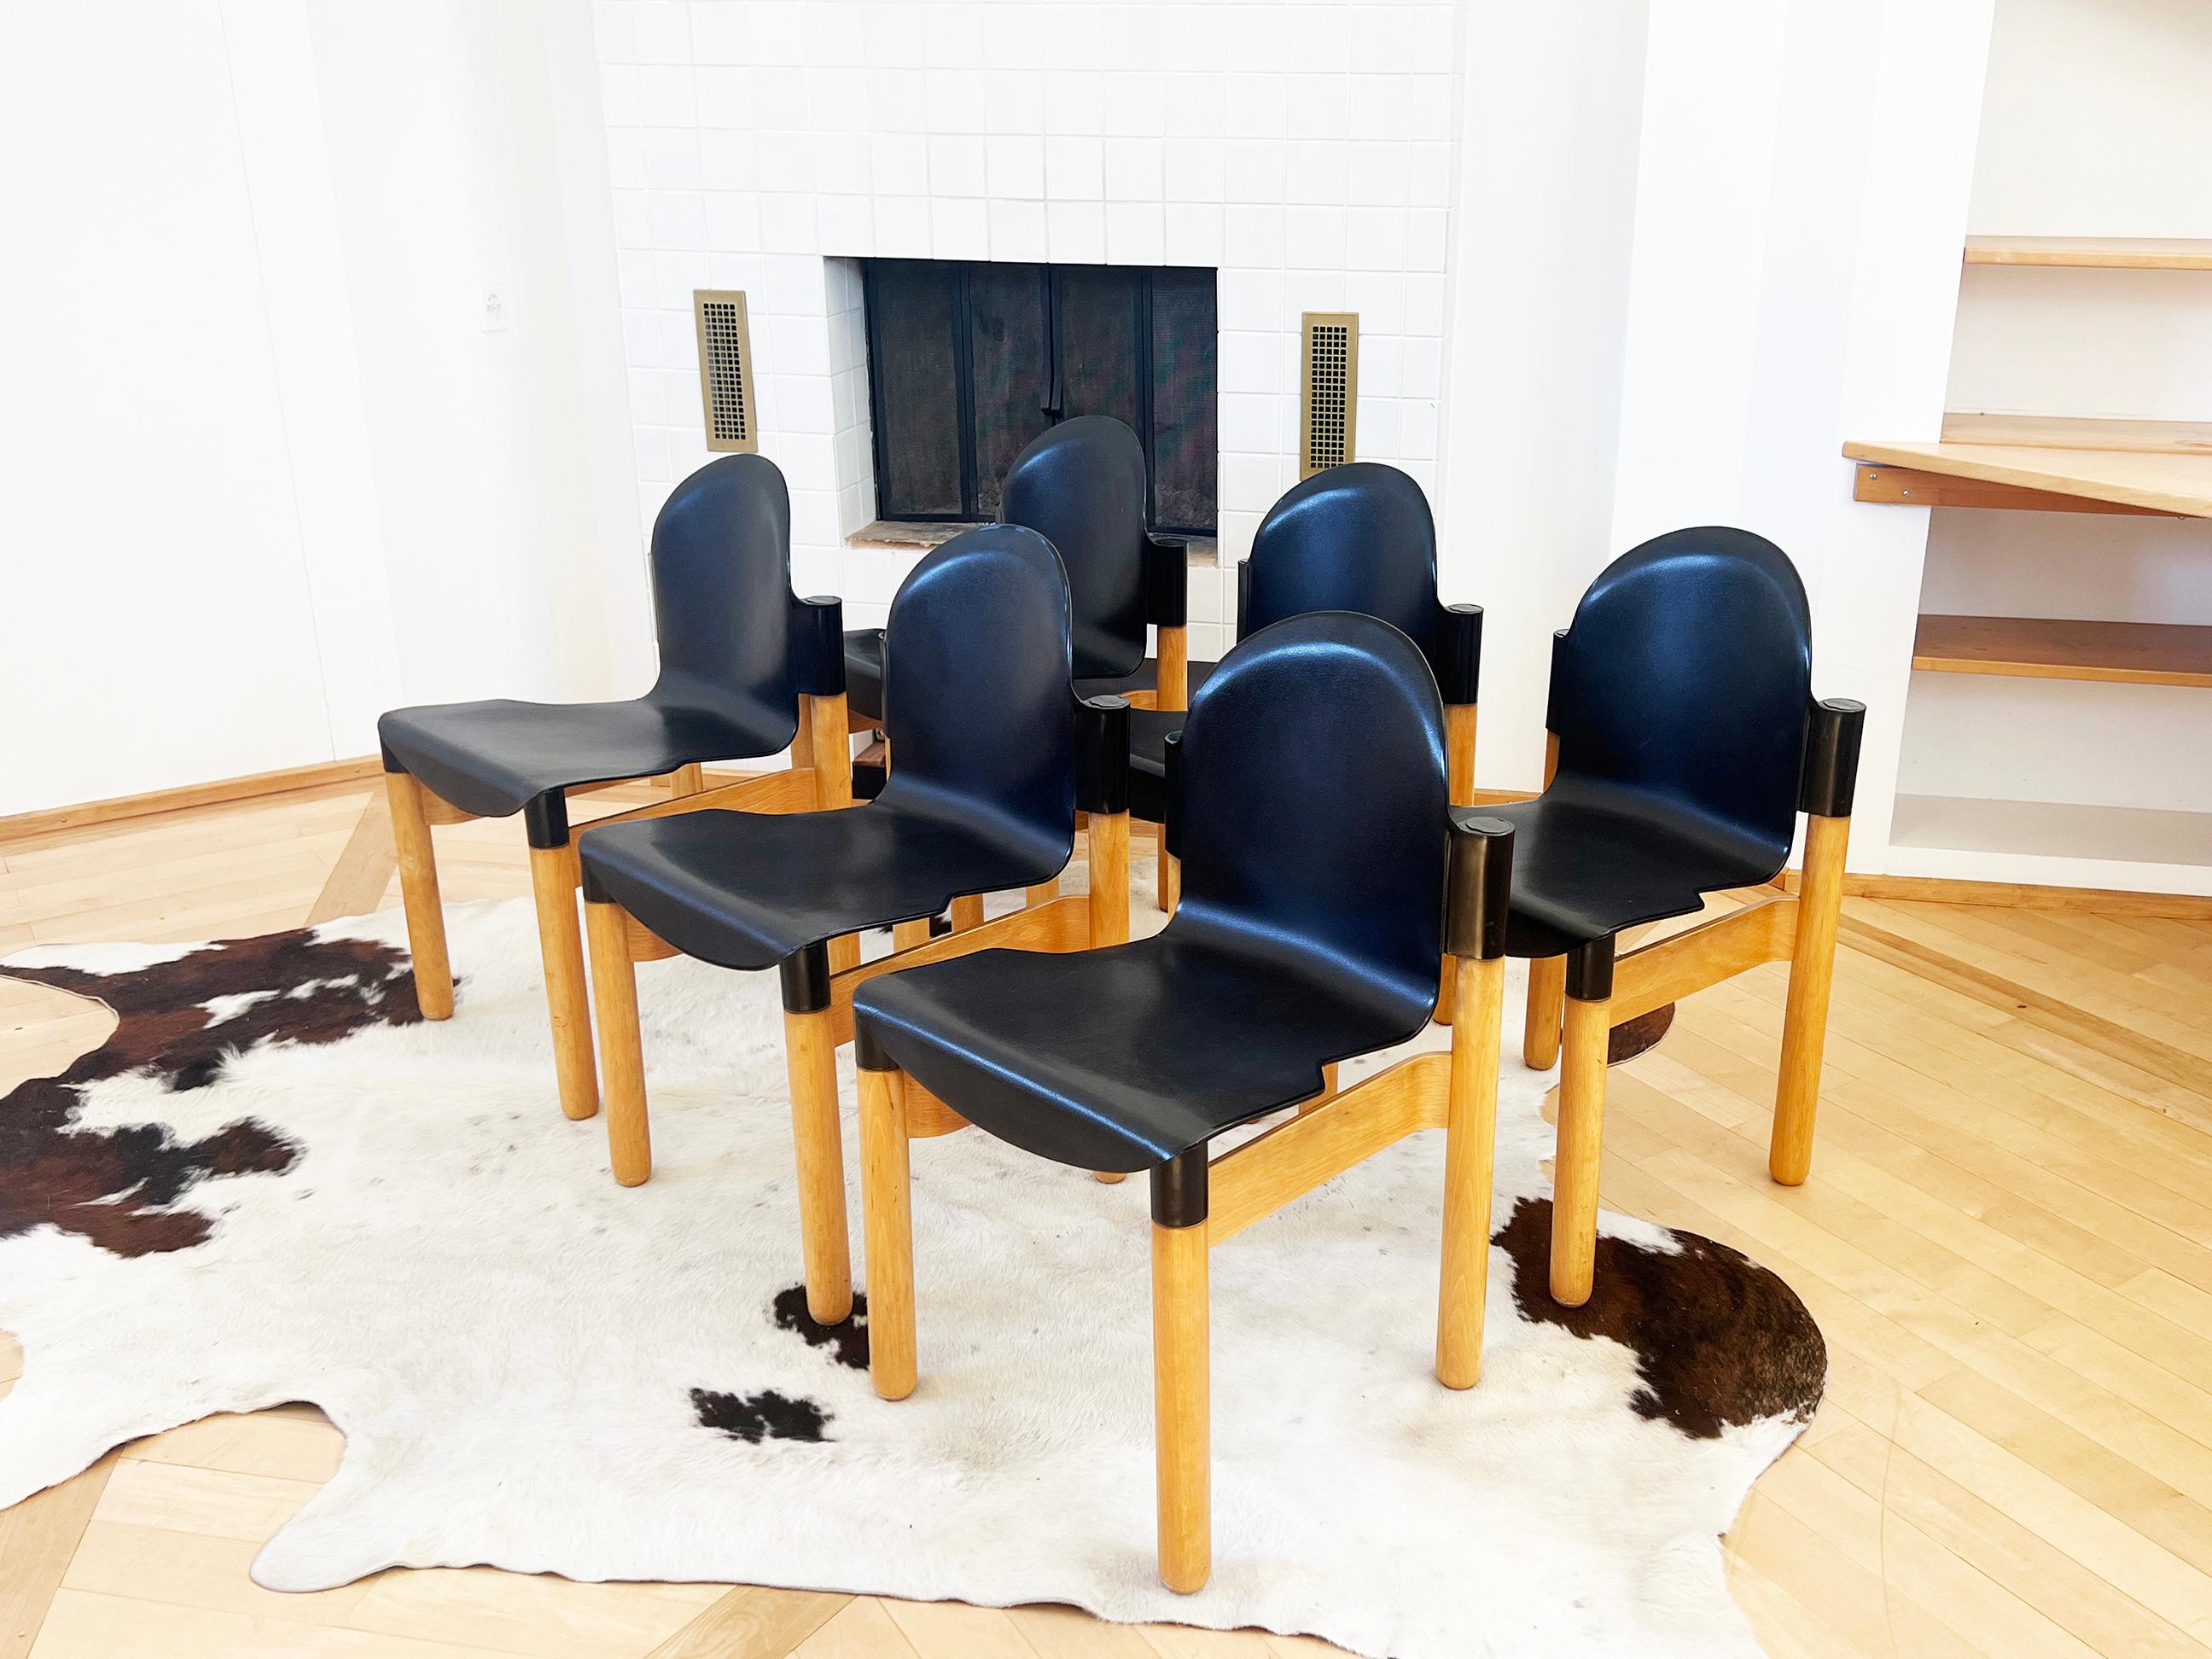 Excellent set of 6 Flex 2000 Stacking Chairs by Gerd Lange for Thonet, with wooden oak frames and black seats. No longer produced, Rare items.

Designed by Gerd Lange in 1983, manufactured in Western-Germany. The legs are made of solid ashwood, the